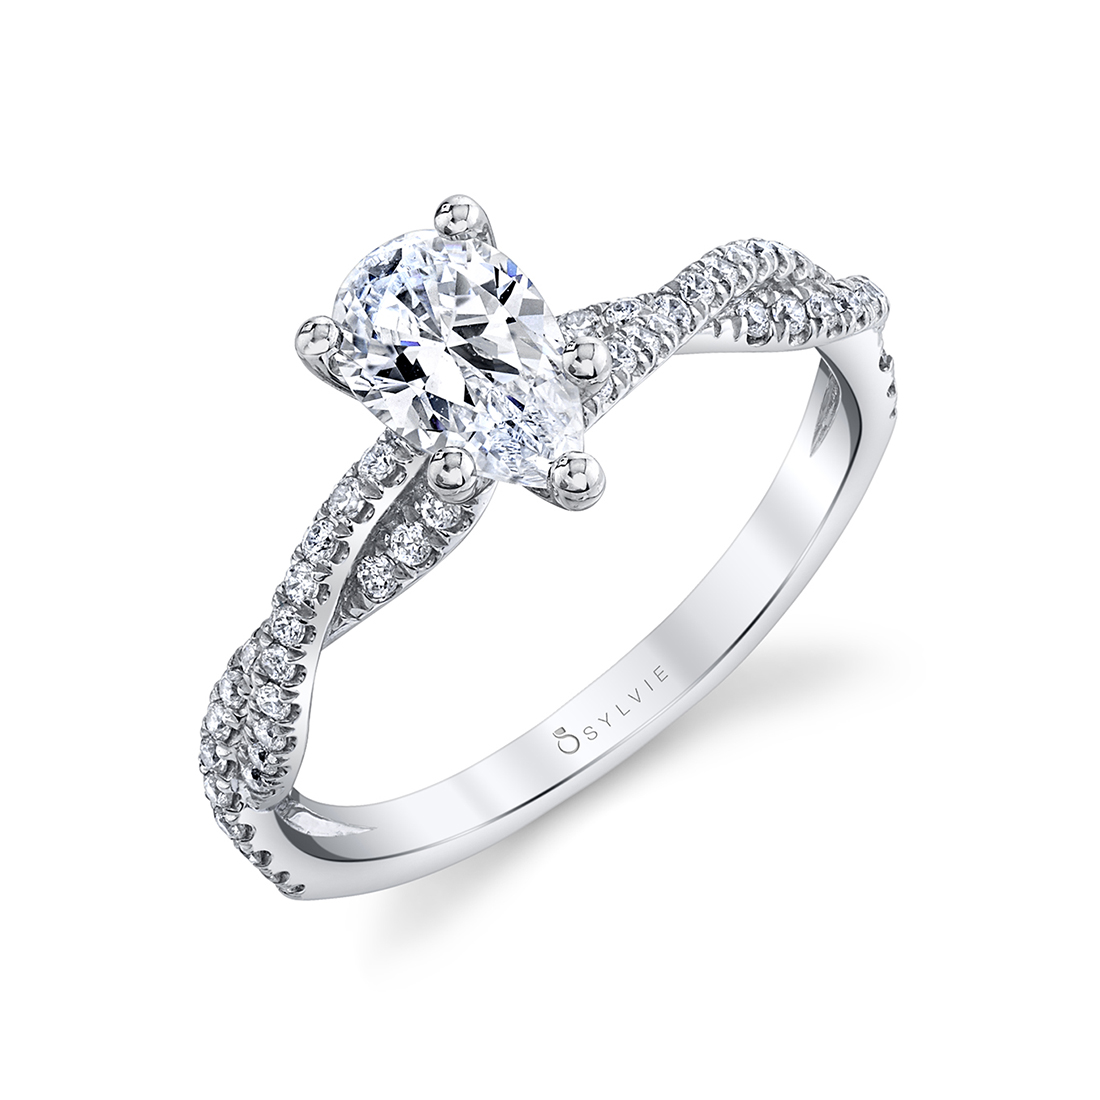 Pear Shaped Engagement Ring